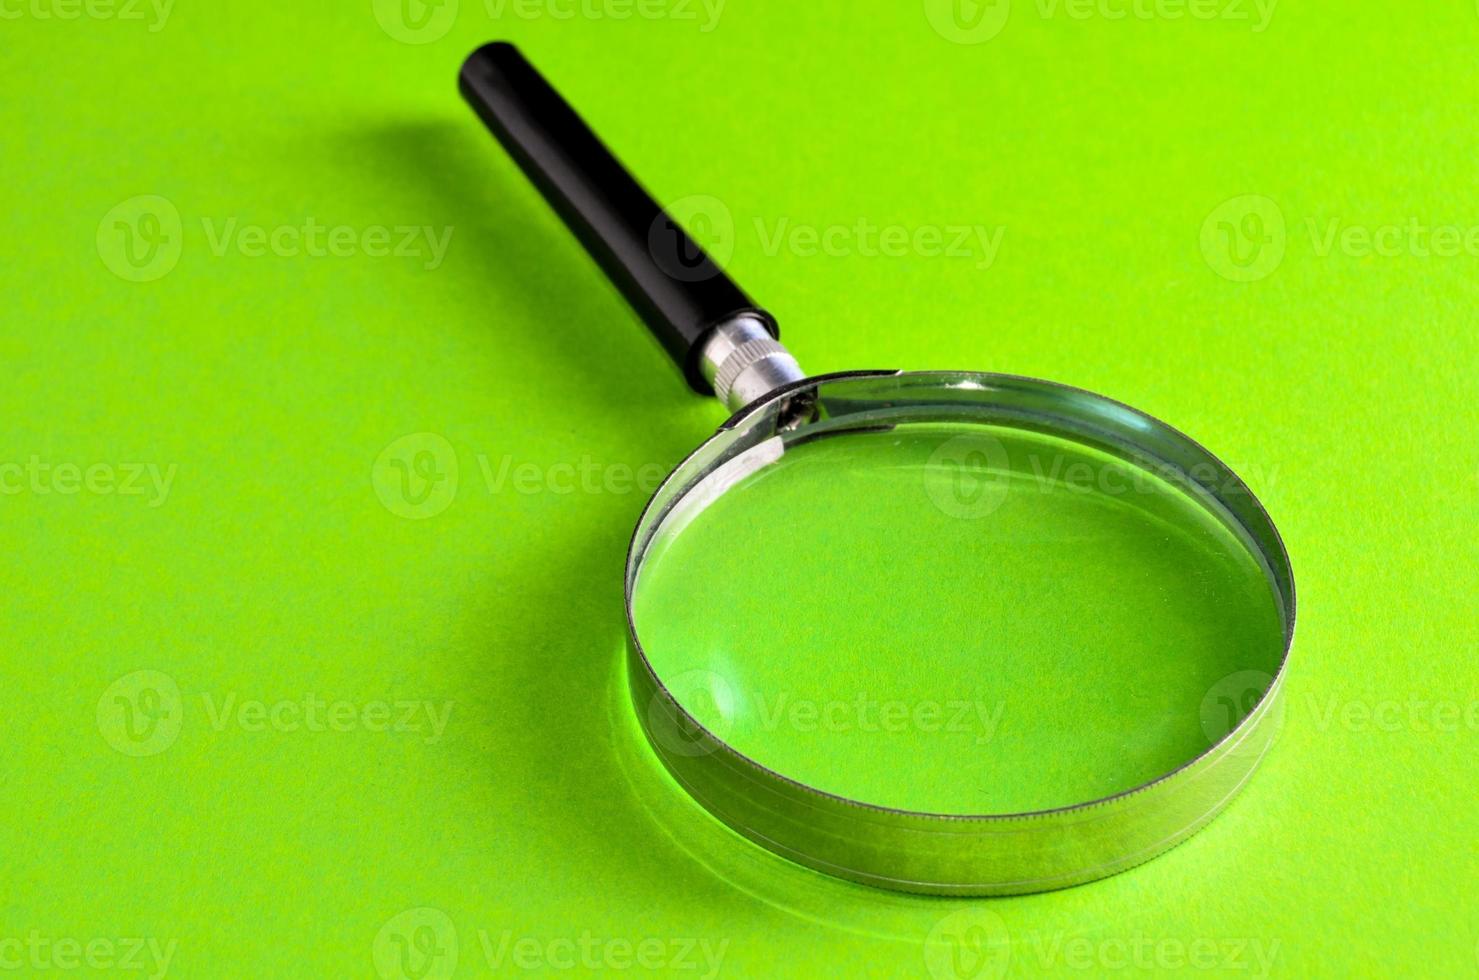 Magnifying glass on green background photo